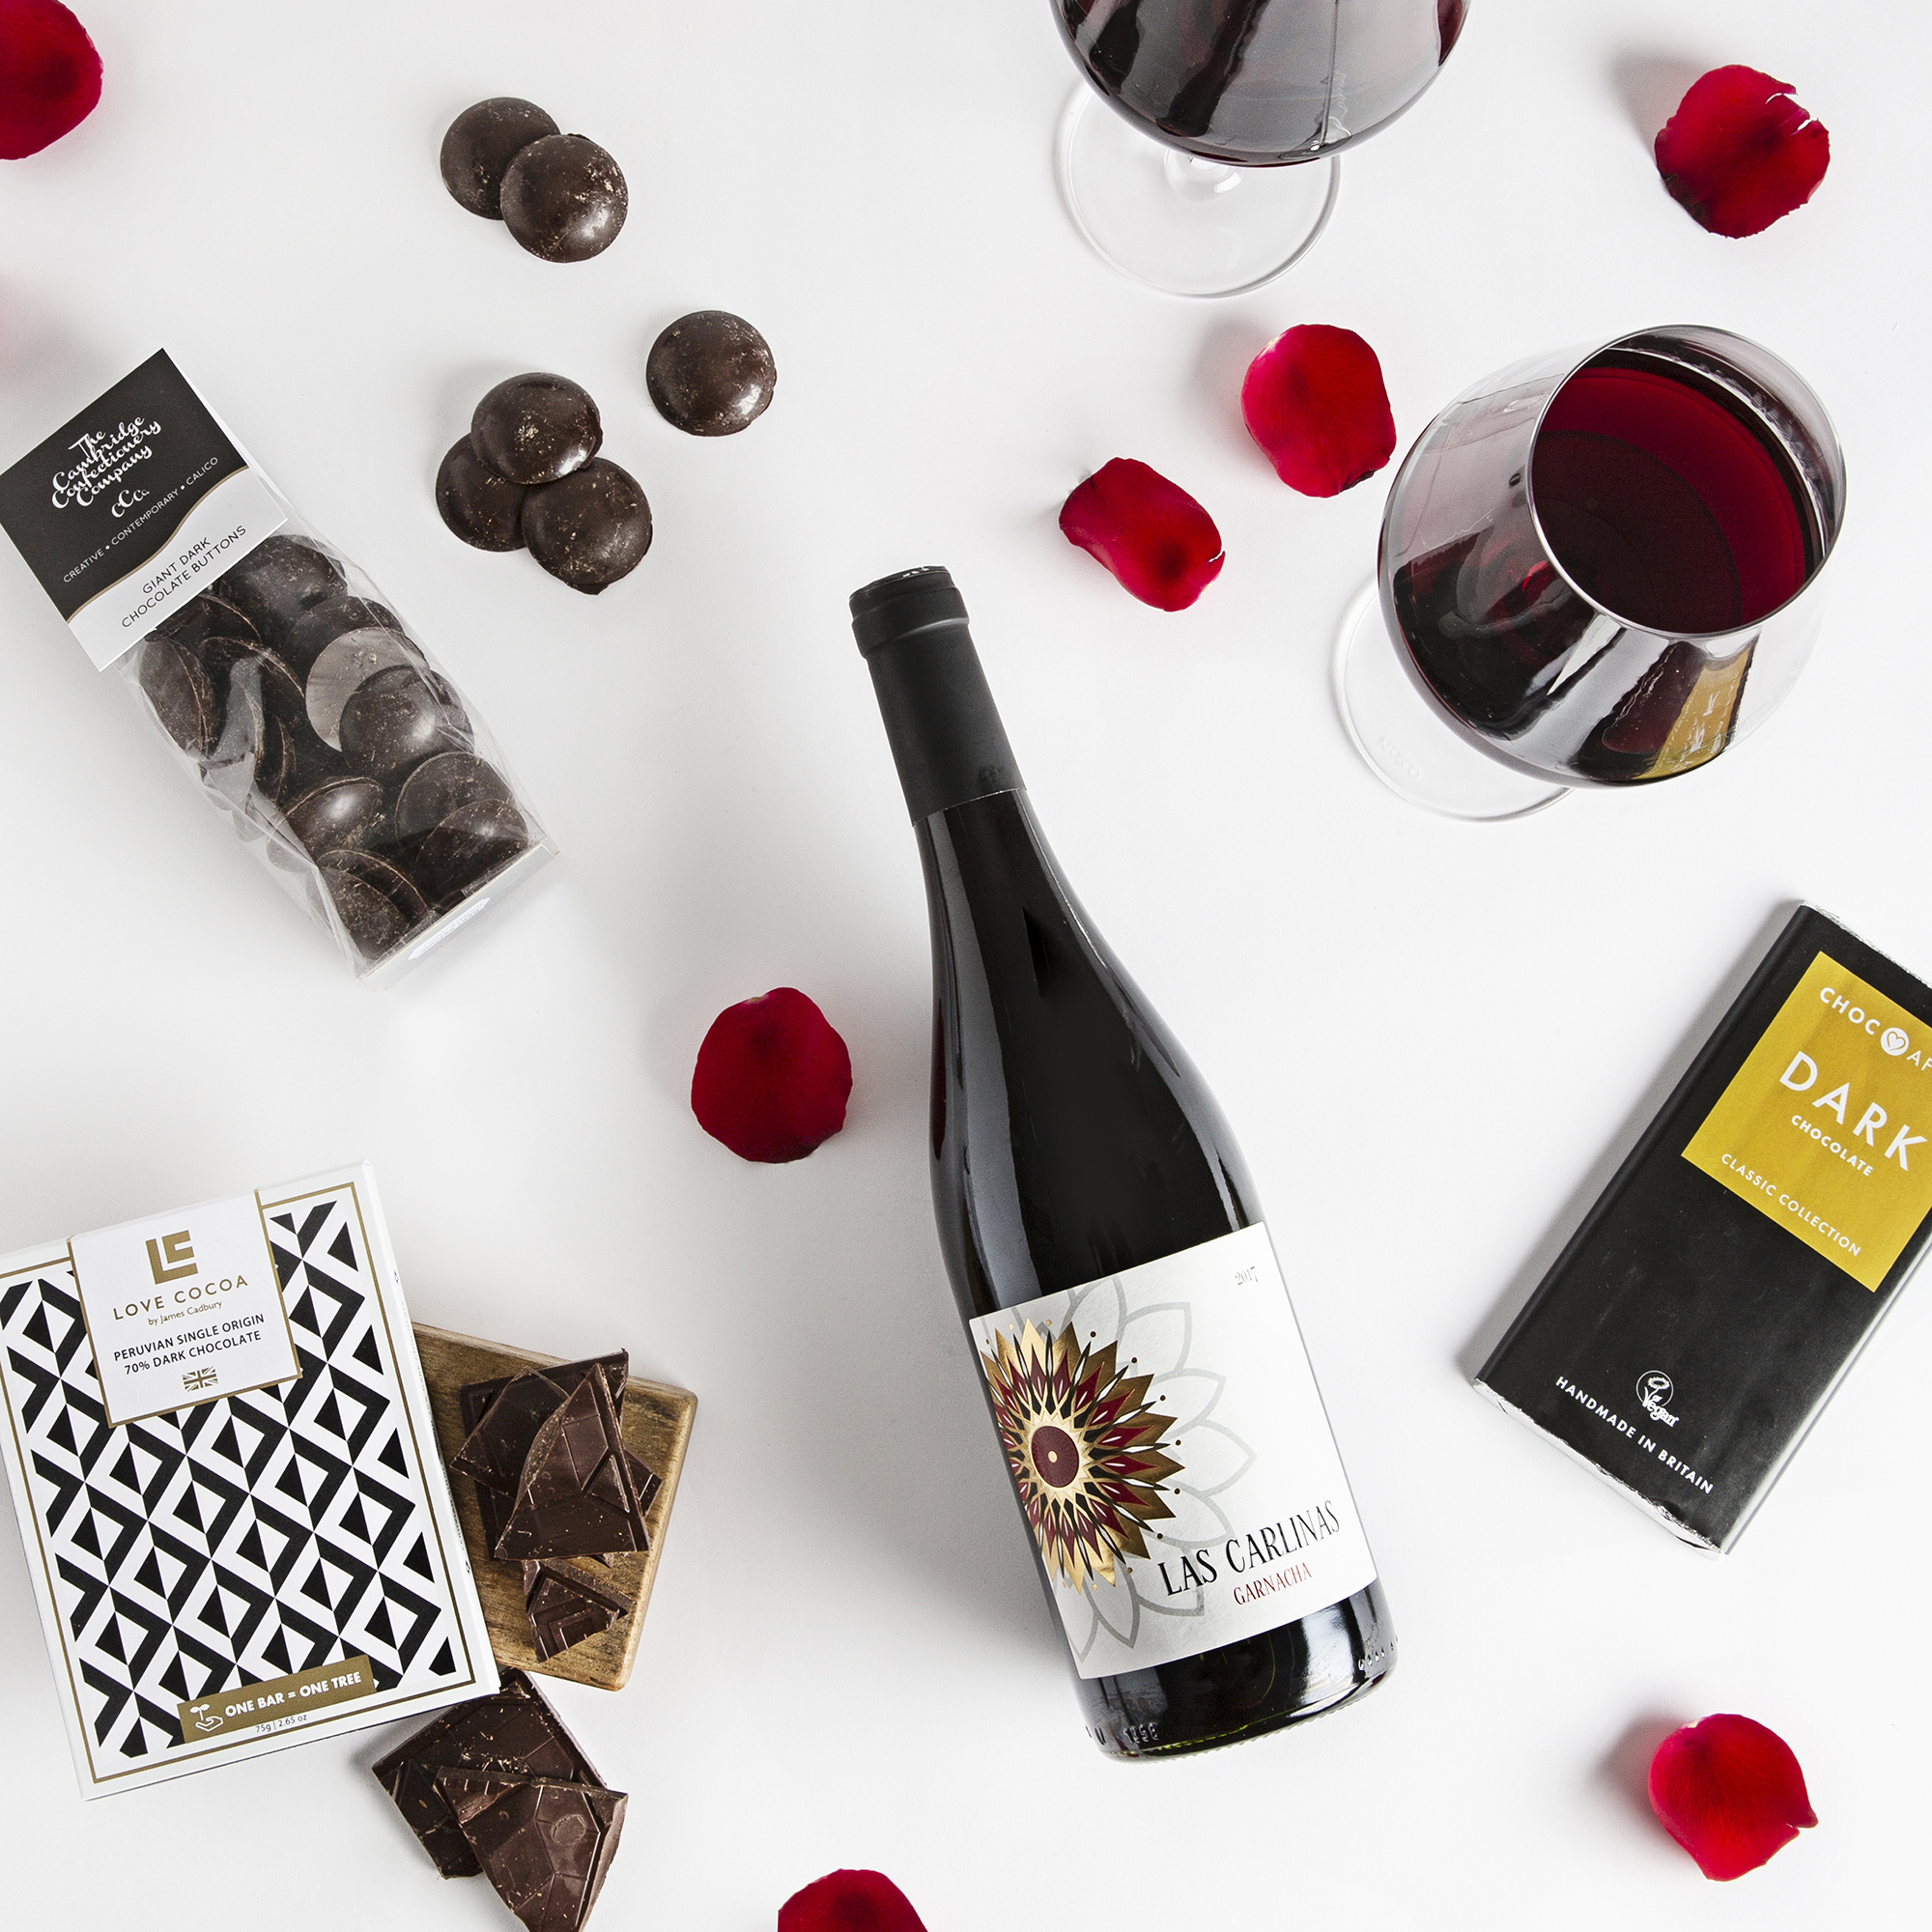 Our top gifts for Valentine's Day. Hampers.com